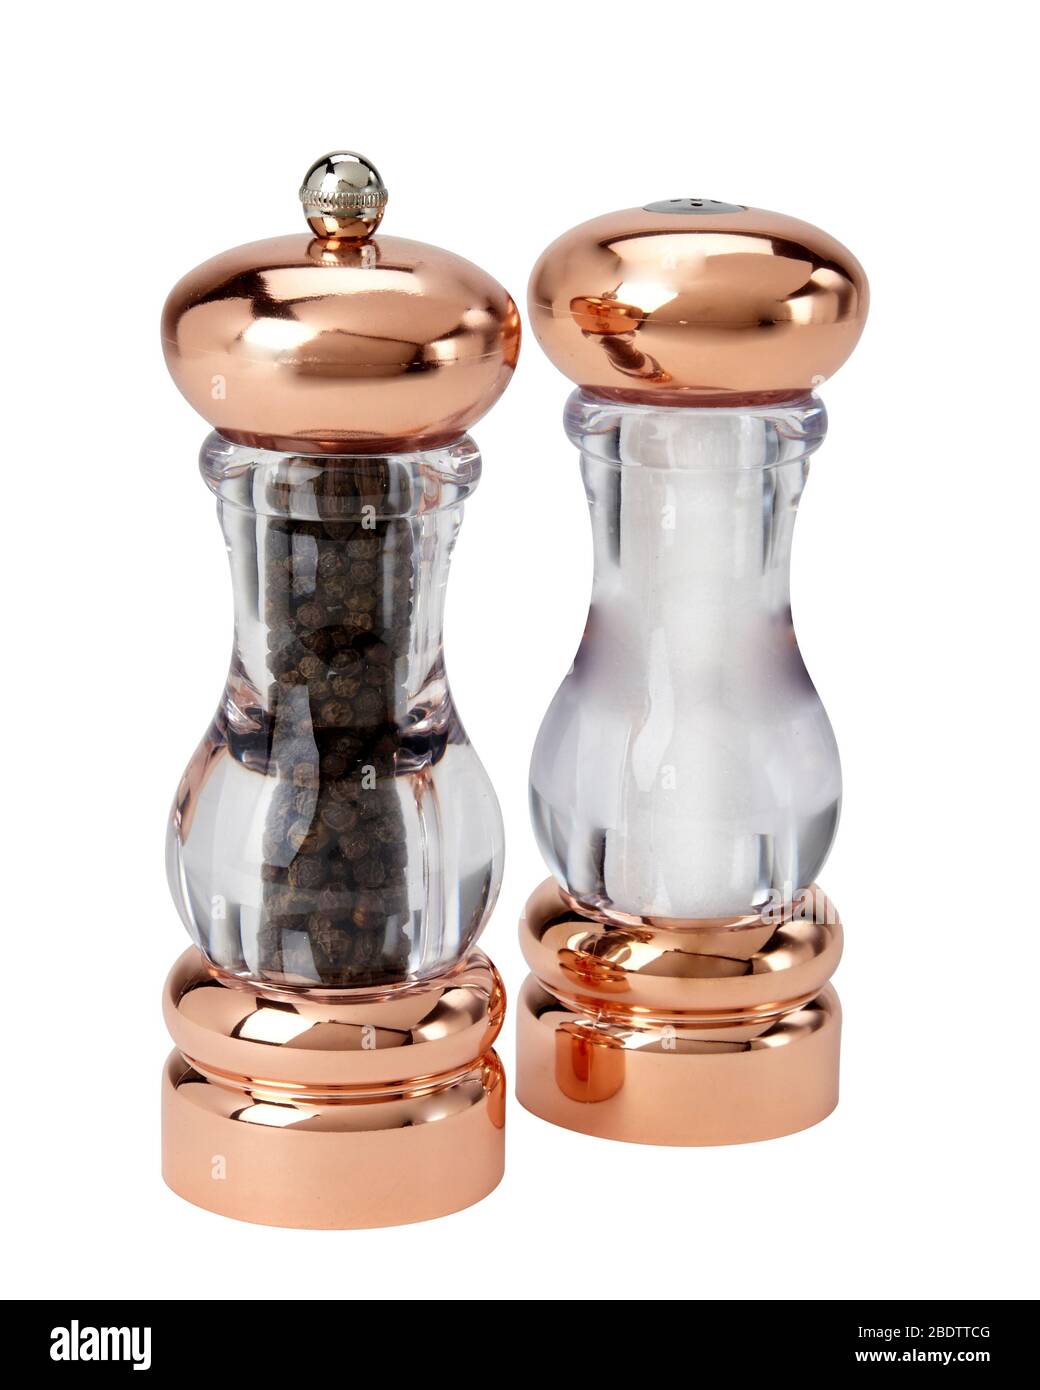 Salt and Pepper grinder, shakers Stock Photo